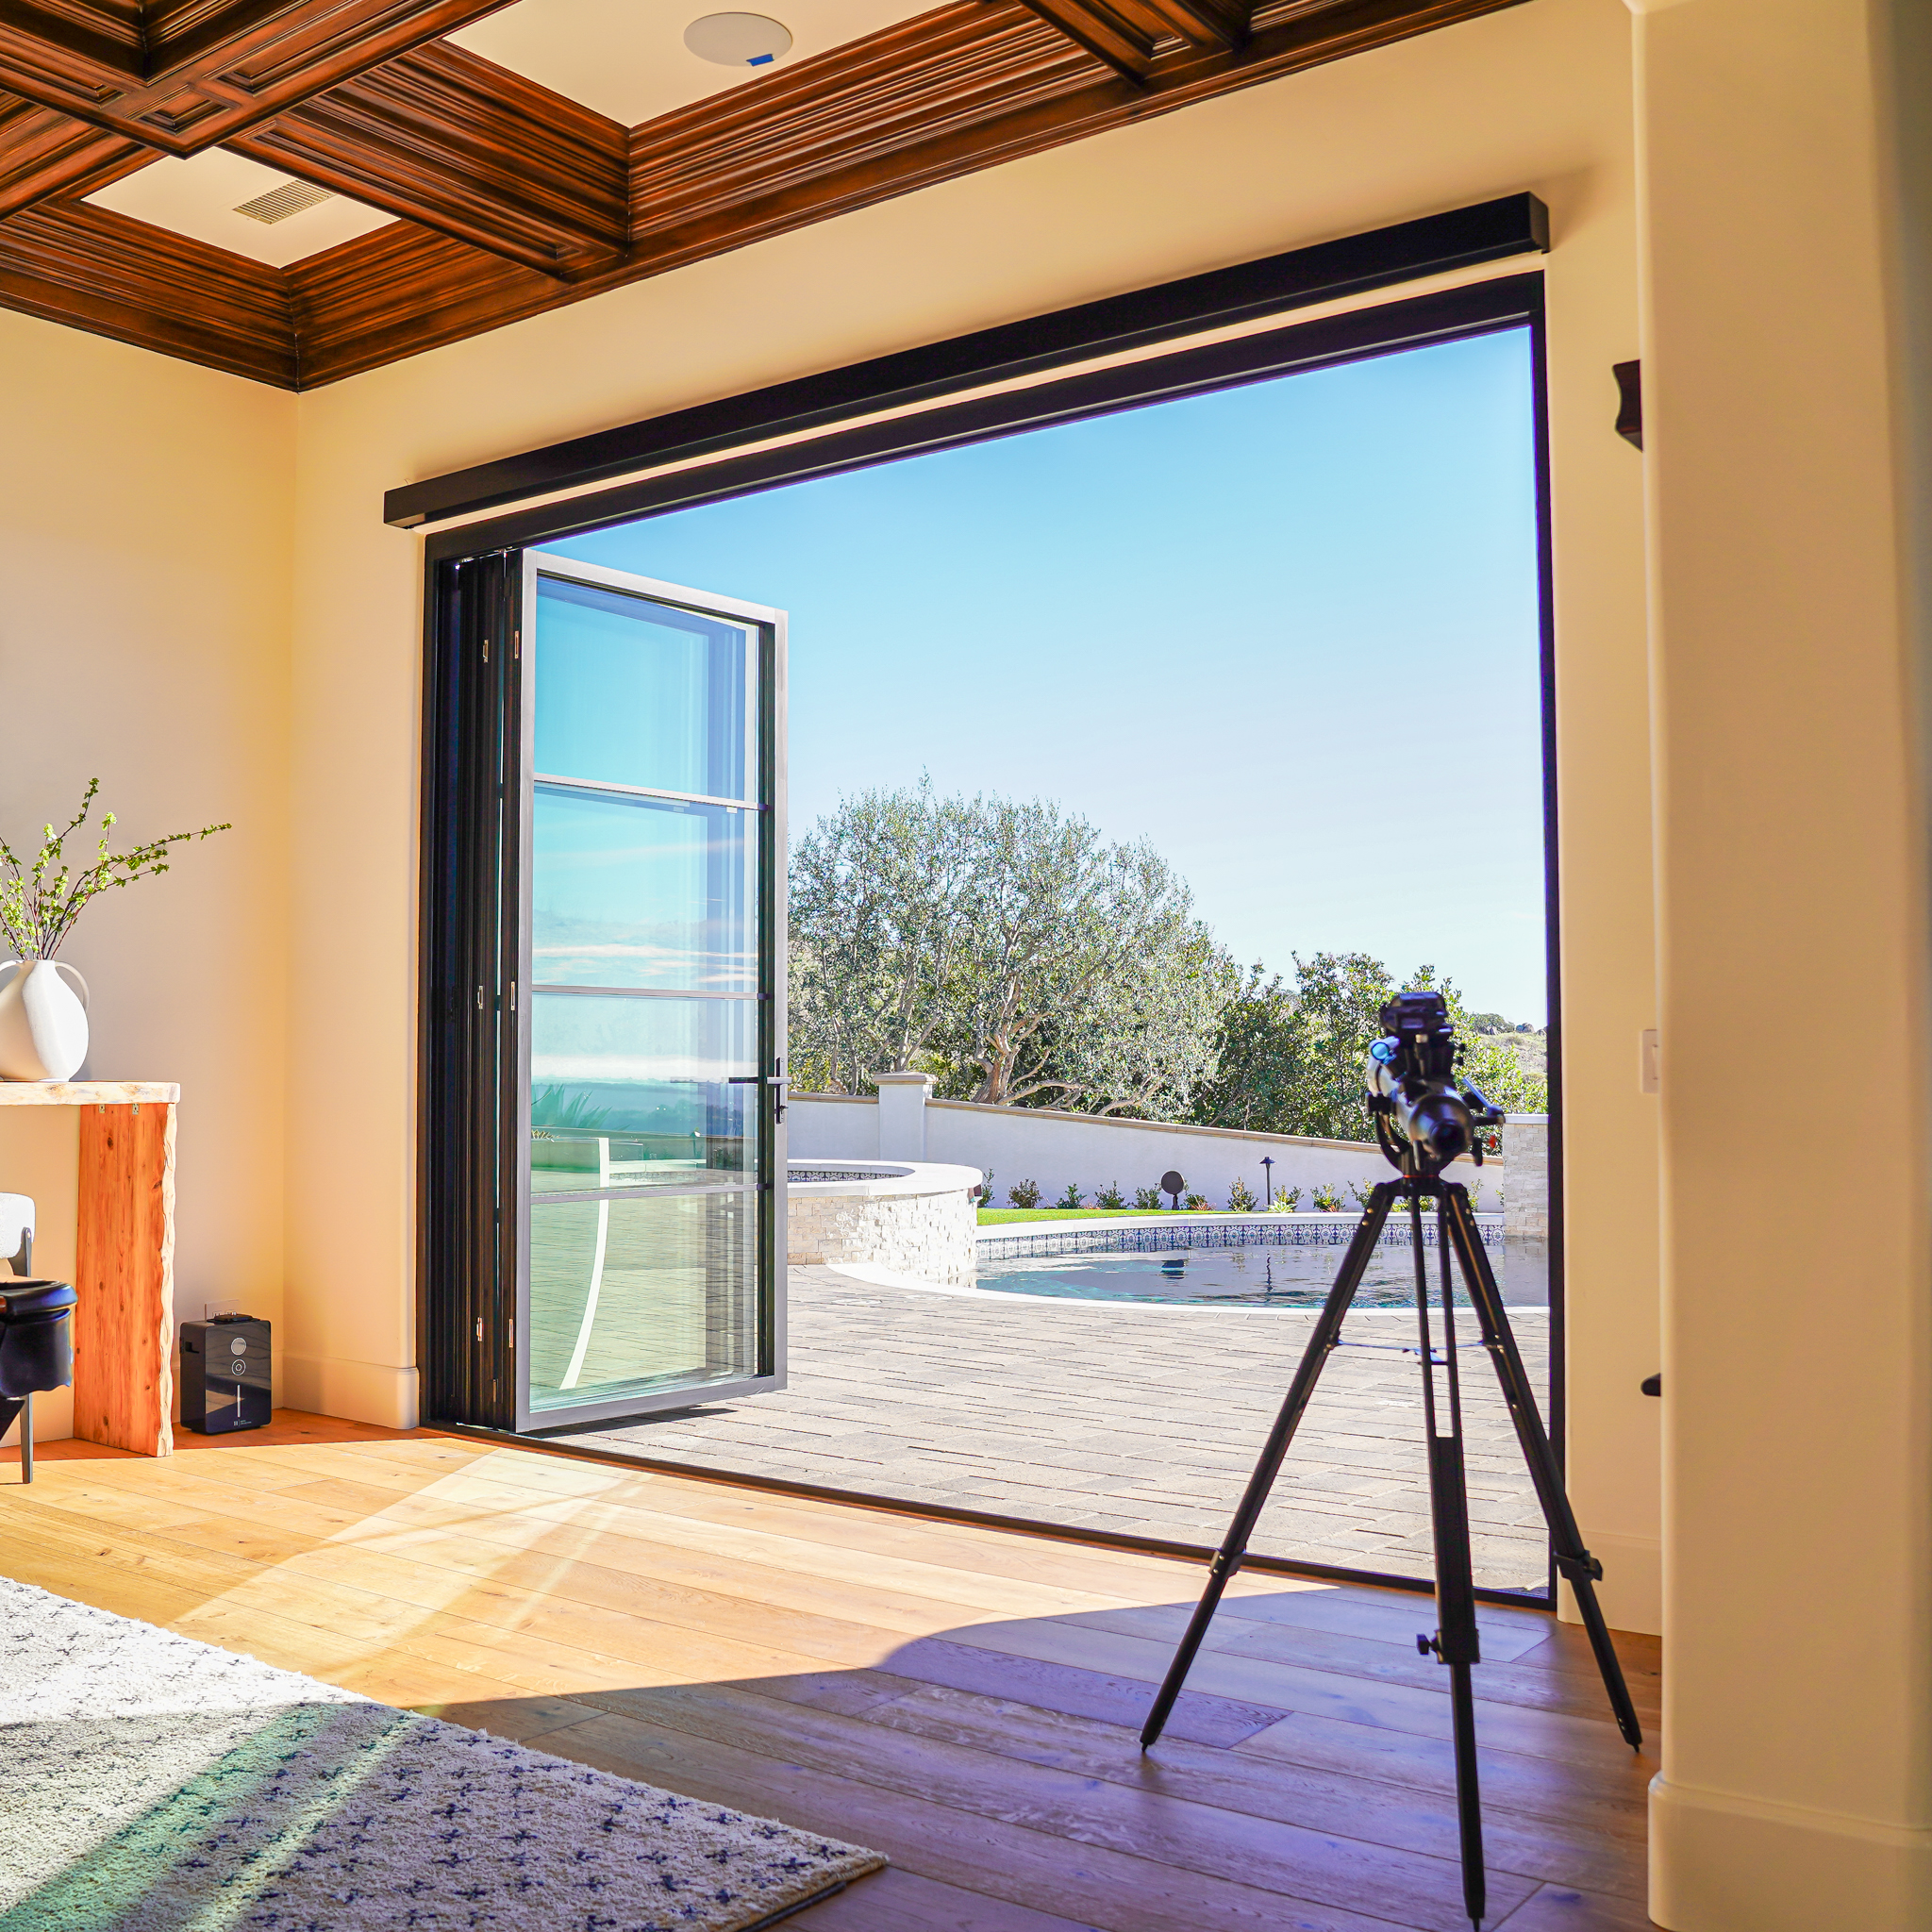 A camera on a tripod is set up at an open patio door, overlooking a terrace with a pool and trees beyond, shot from inside a modern room with wooden floors and ceiling.